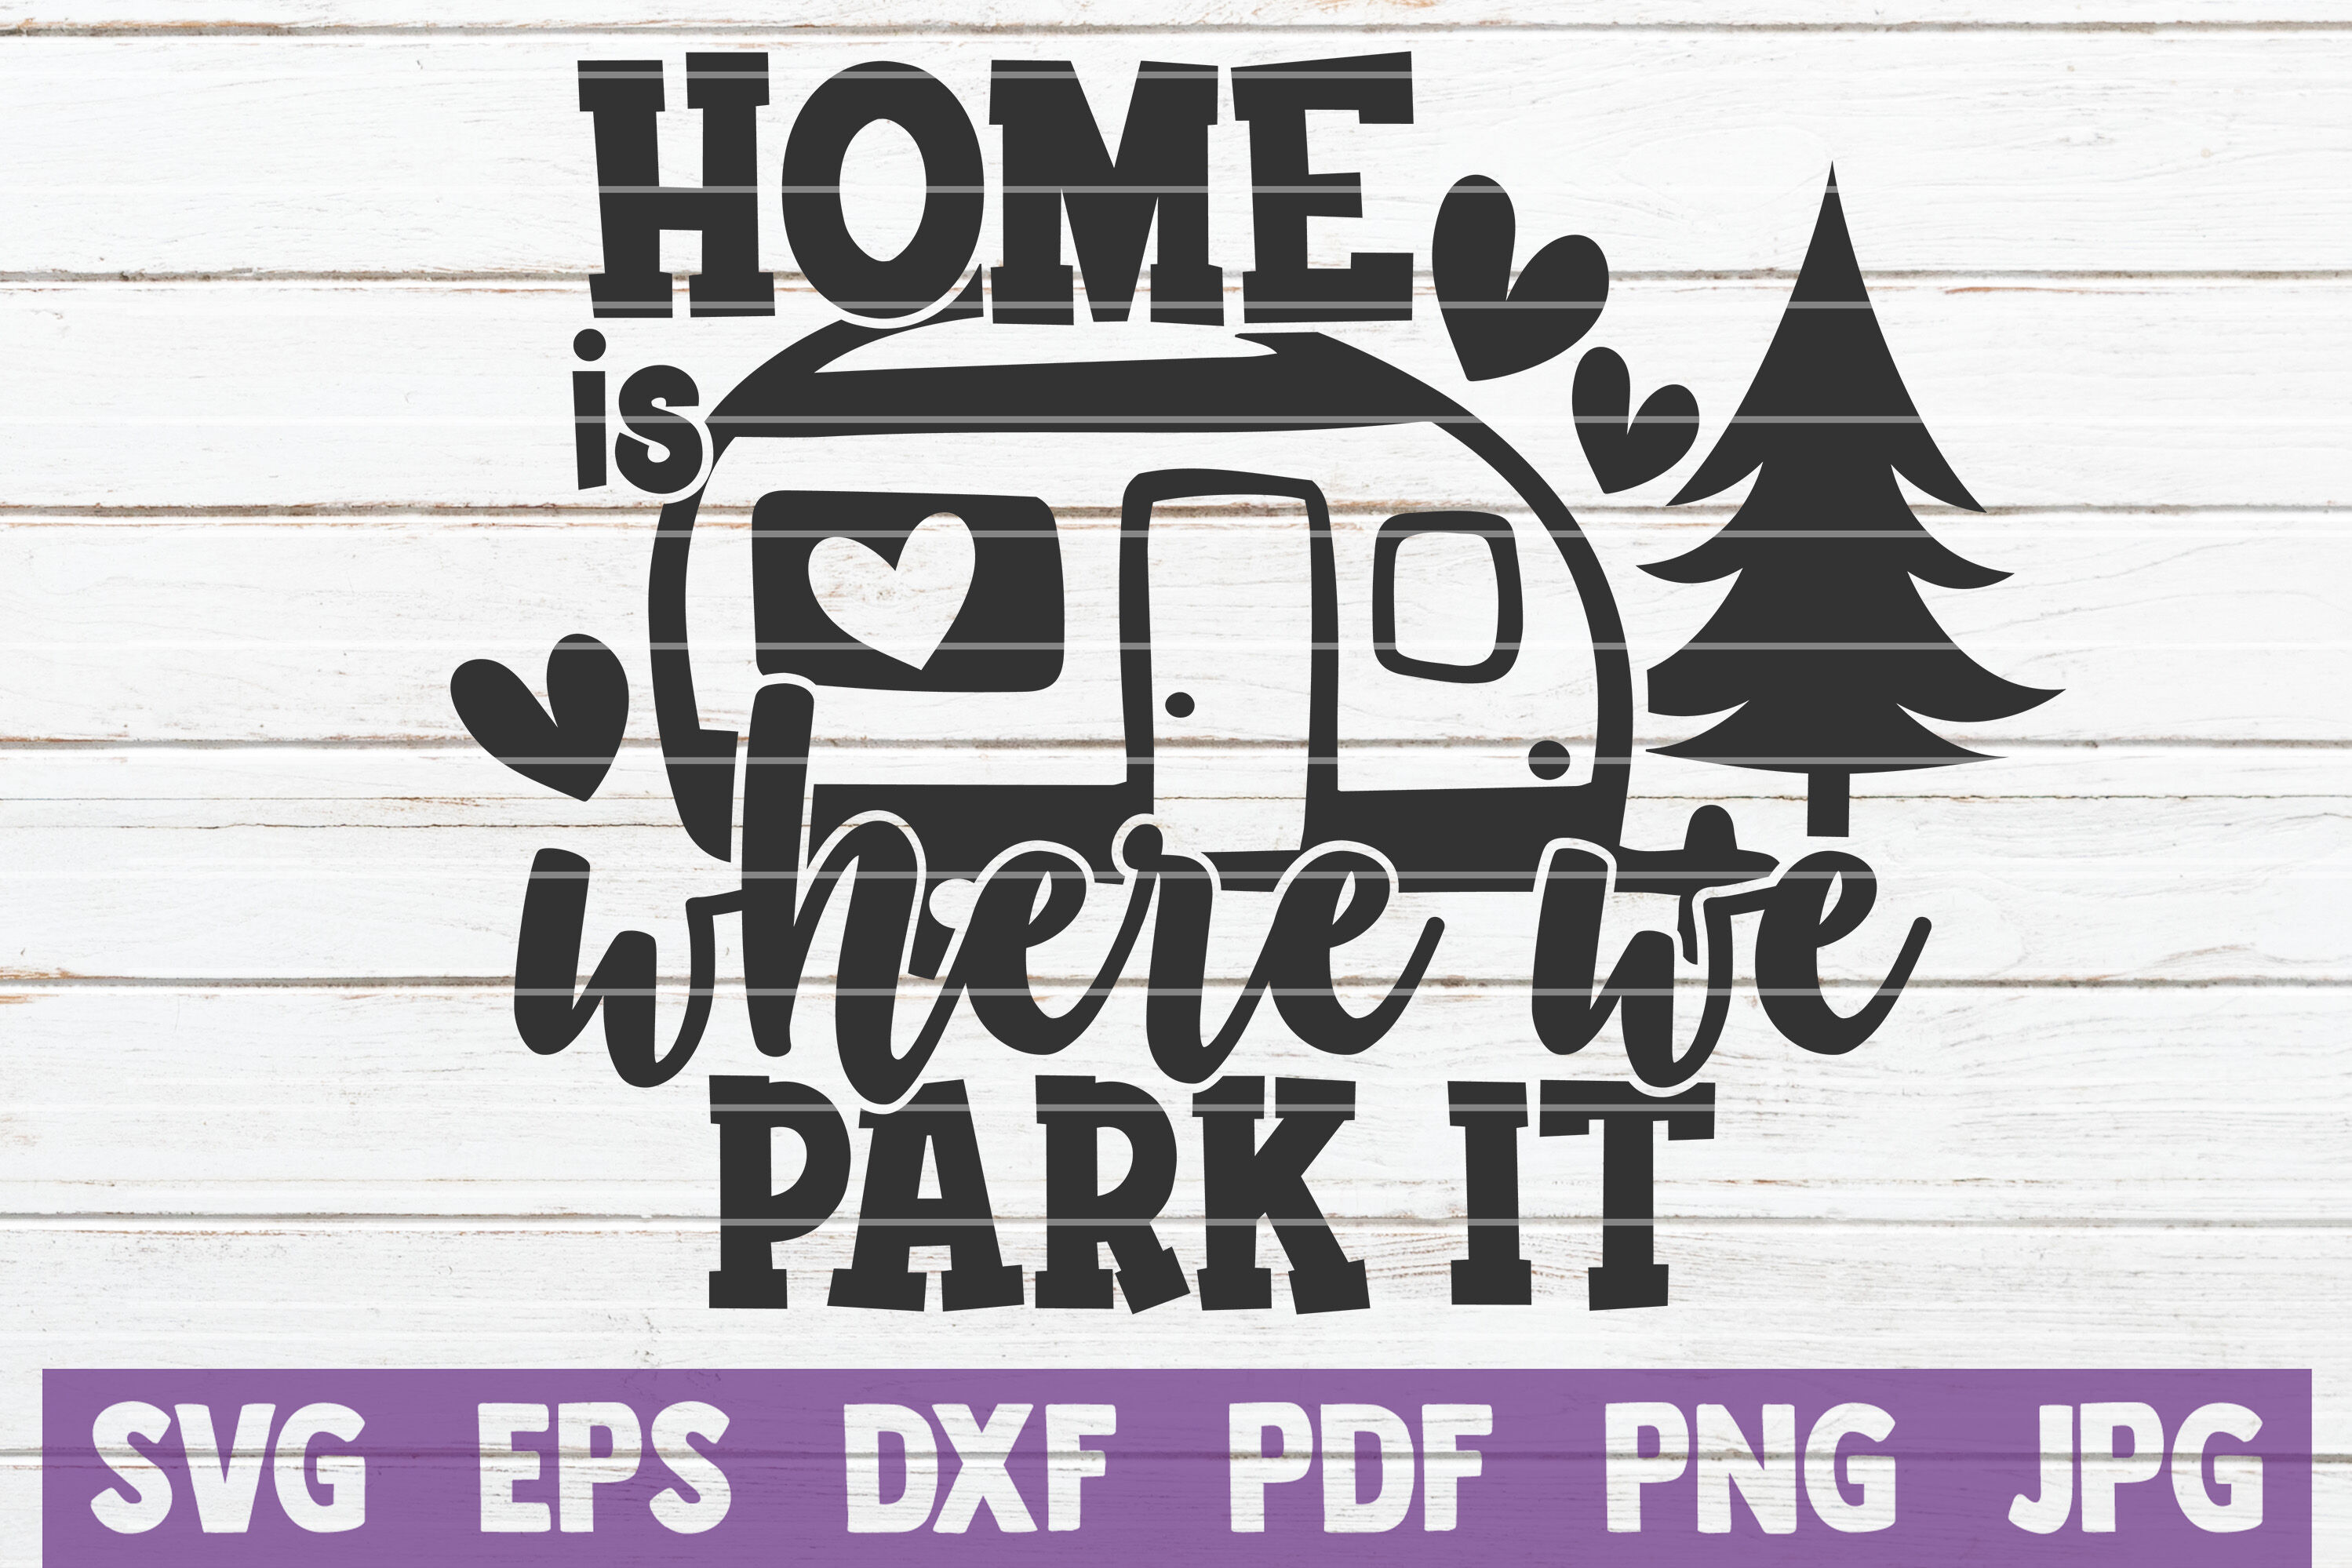 Camp Life SVG Bundle | Camping SVG Cut Files By MintyMarshmallows